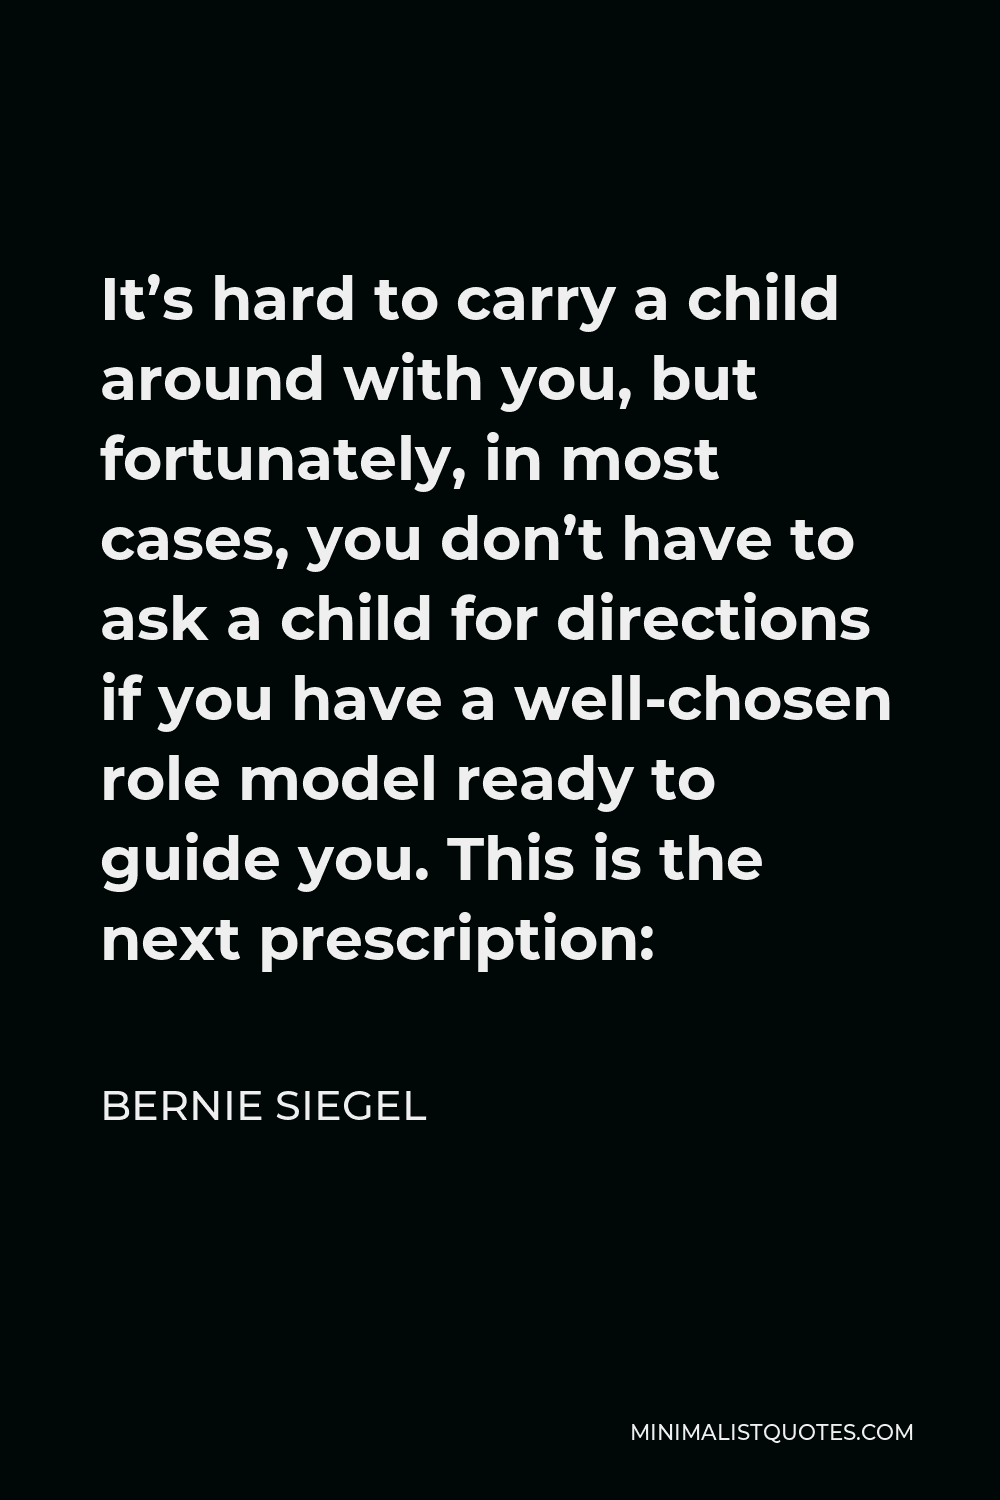 Bernie Siegel Quote - It’s hard to carry a child around with you, but fortunately, in most cases, you don’t have to ask a child for directions if you have a well-chosen role model ready to guide you. This is the next prescription: